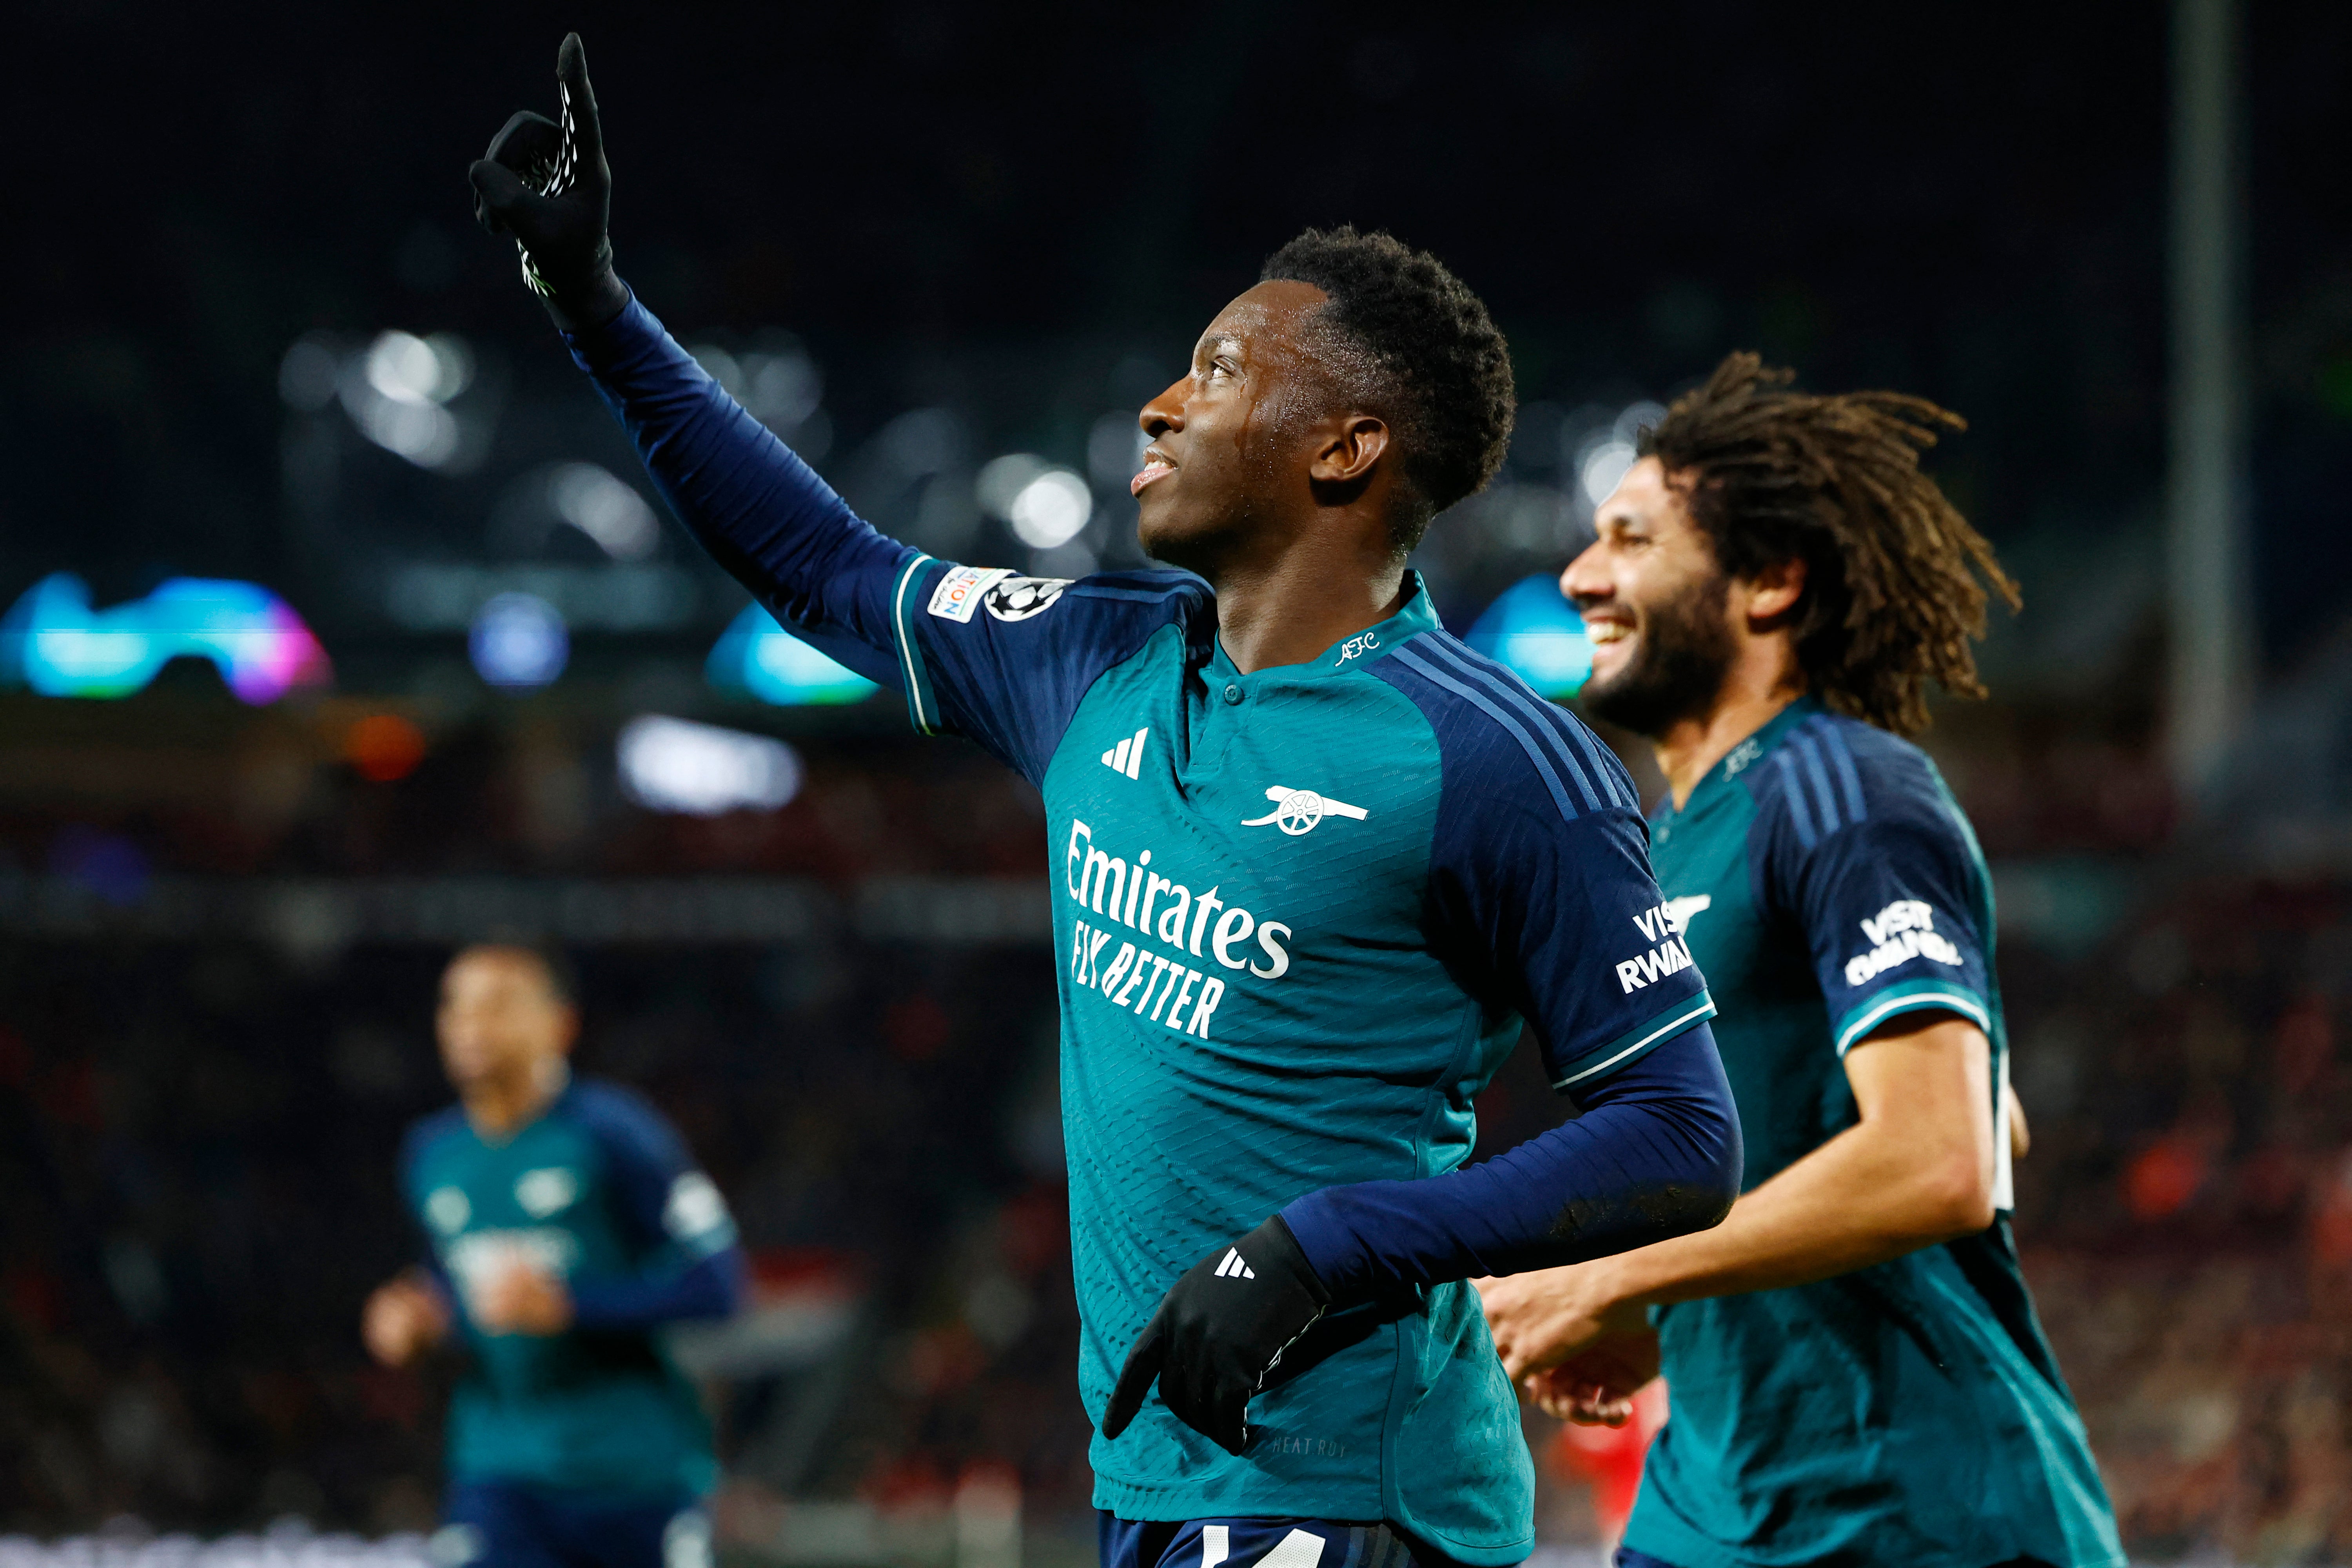 Eddie Nketiah scored his first Champions League goal as Arsenal drew in the Netherlands